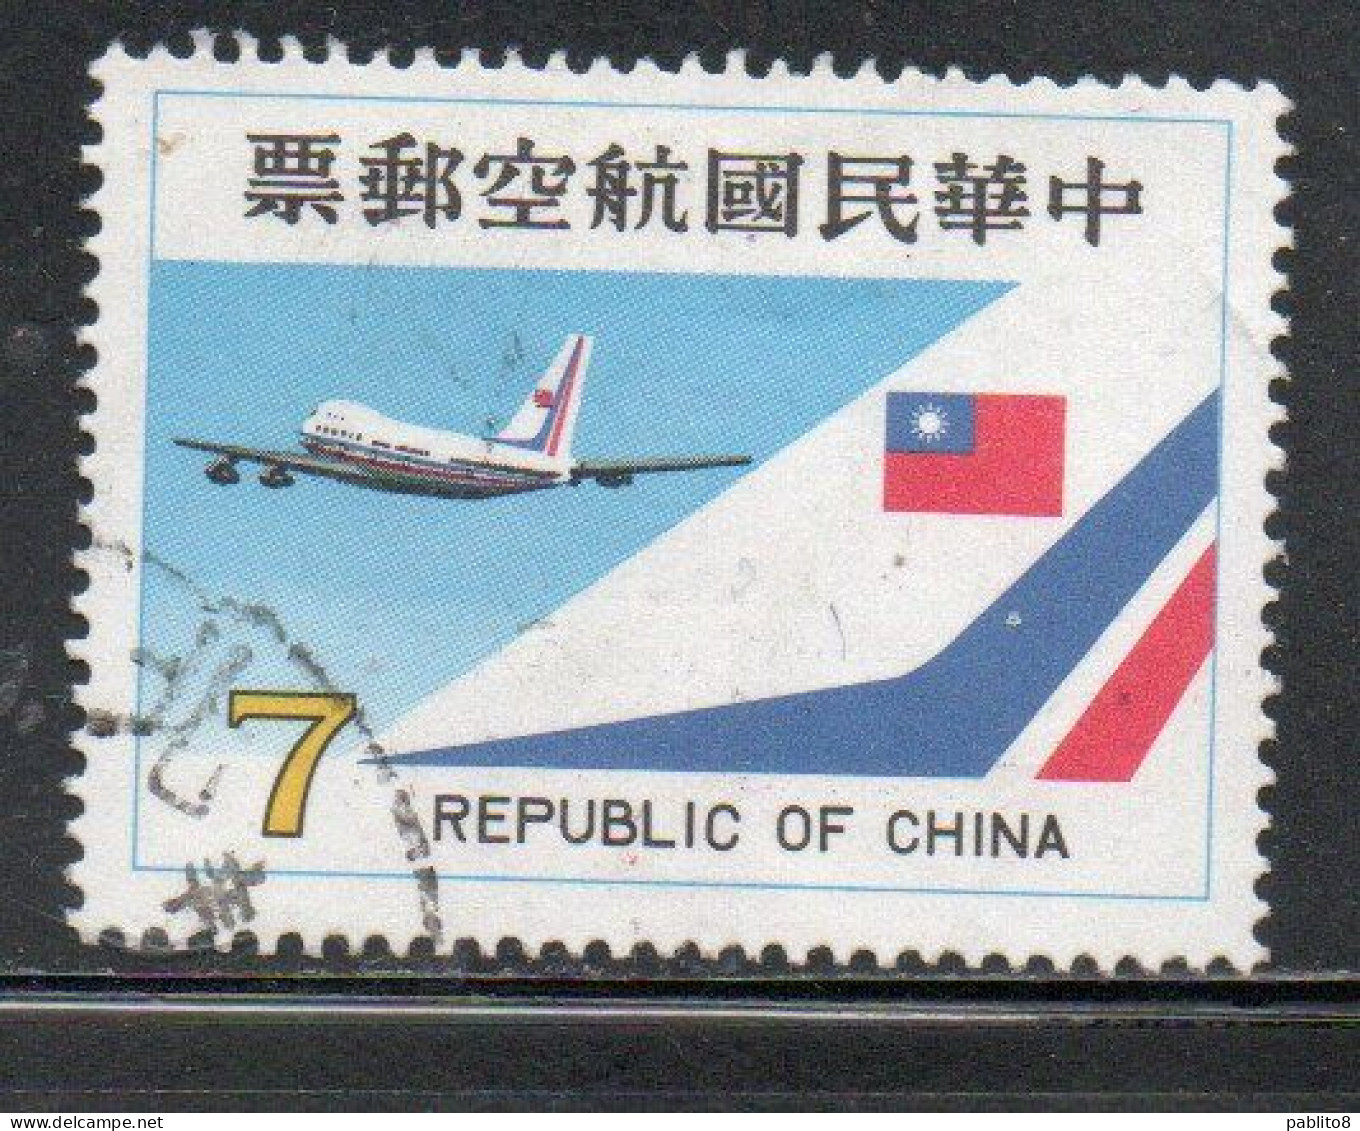 CHINA REPUBLIC CINA TAIWAN FORMOSA 1980 AIR POST MAIL AIRMAIL CHINA AIRLINES JET 7$ USED USATO OBLITERE' - Airmail